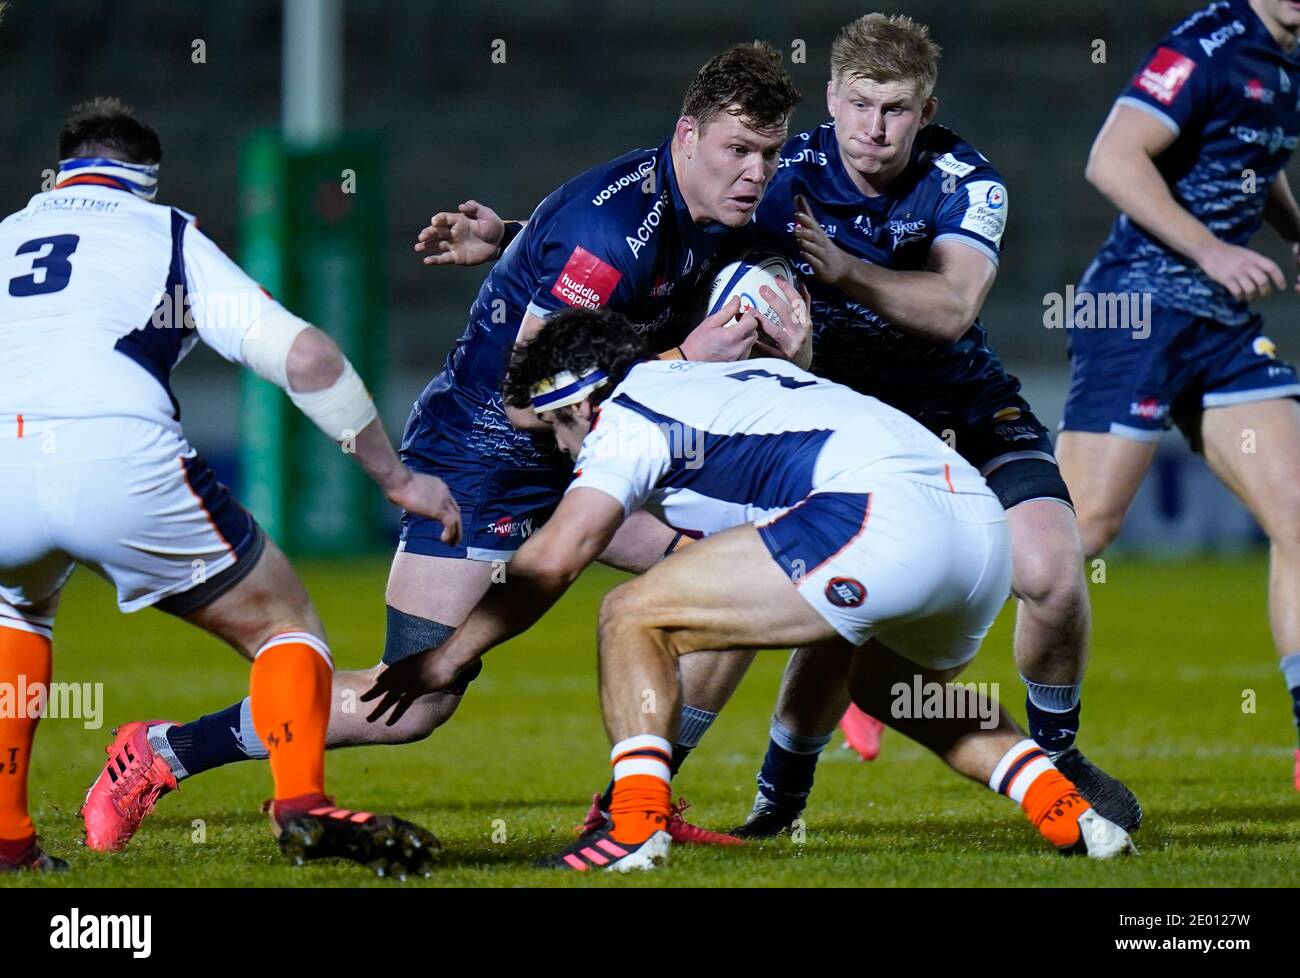 Sale Sharks flanker Cobus Wiese runs at the Edinburgh Rugby defence during the European Champions Cup match Sale Sharks -V- Edinburgh Rugby at The AJ Stock Photo